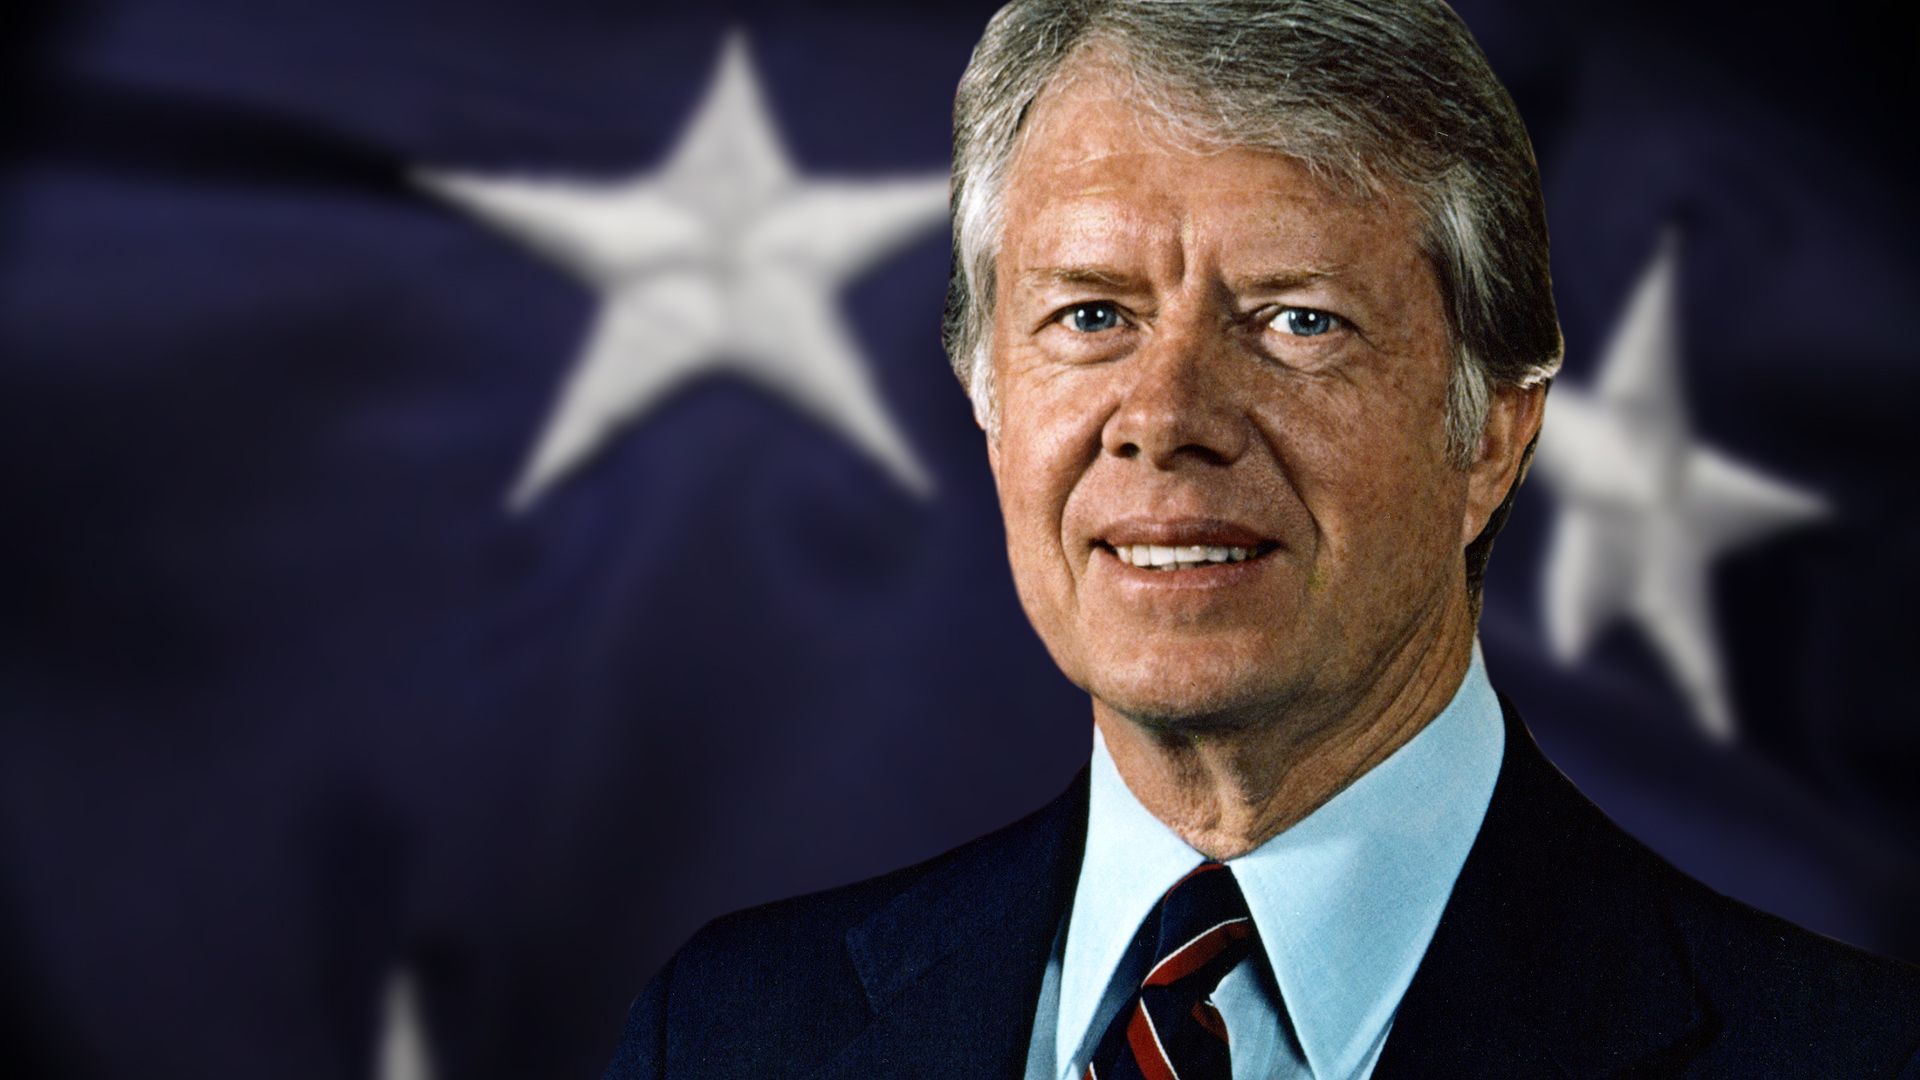 Jimmy Carter's life, presidency, and Nobel Peace Prize